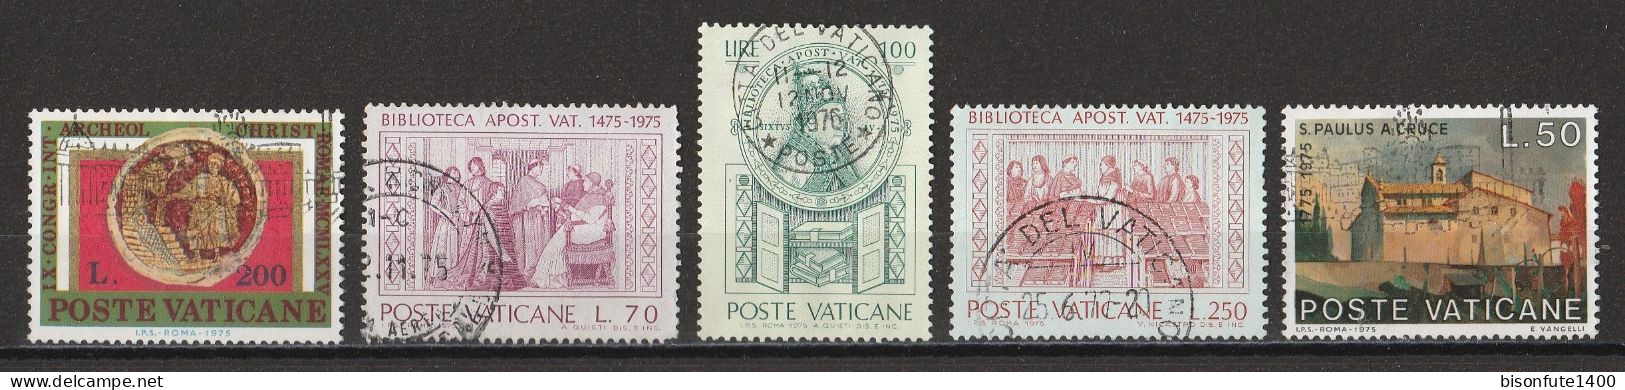 Vatican 1975 : Timbres Yvert & Tellier N° 593 - 596 - 600 - 601 - 602 - 603 - 604 - 605 - 606 - 607 - 608 - 609 Et... - Used Stamps